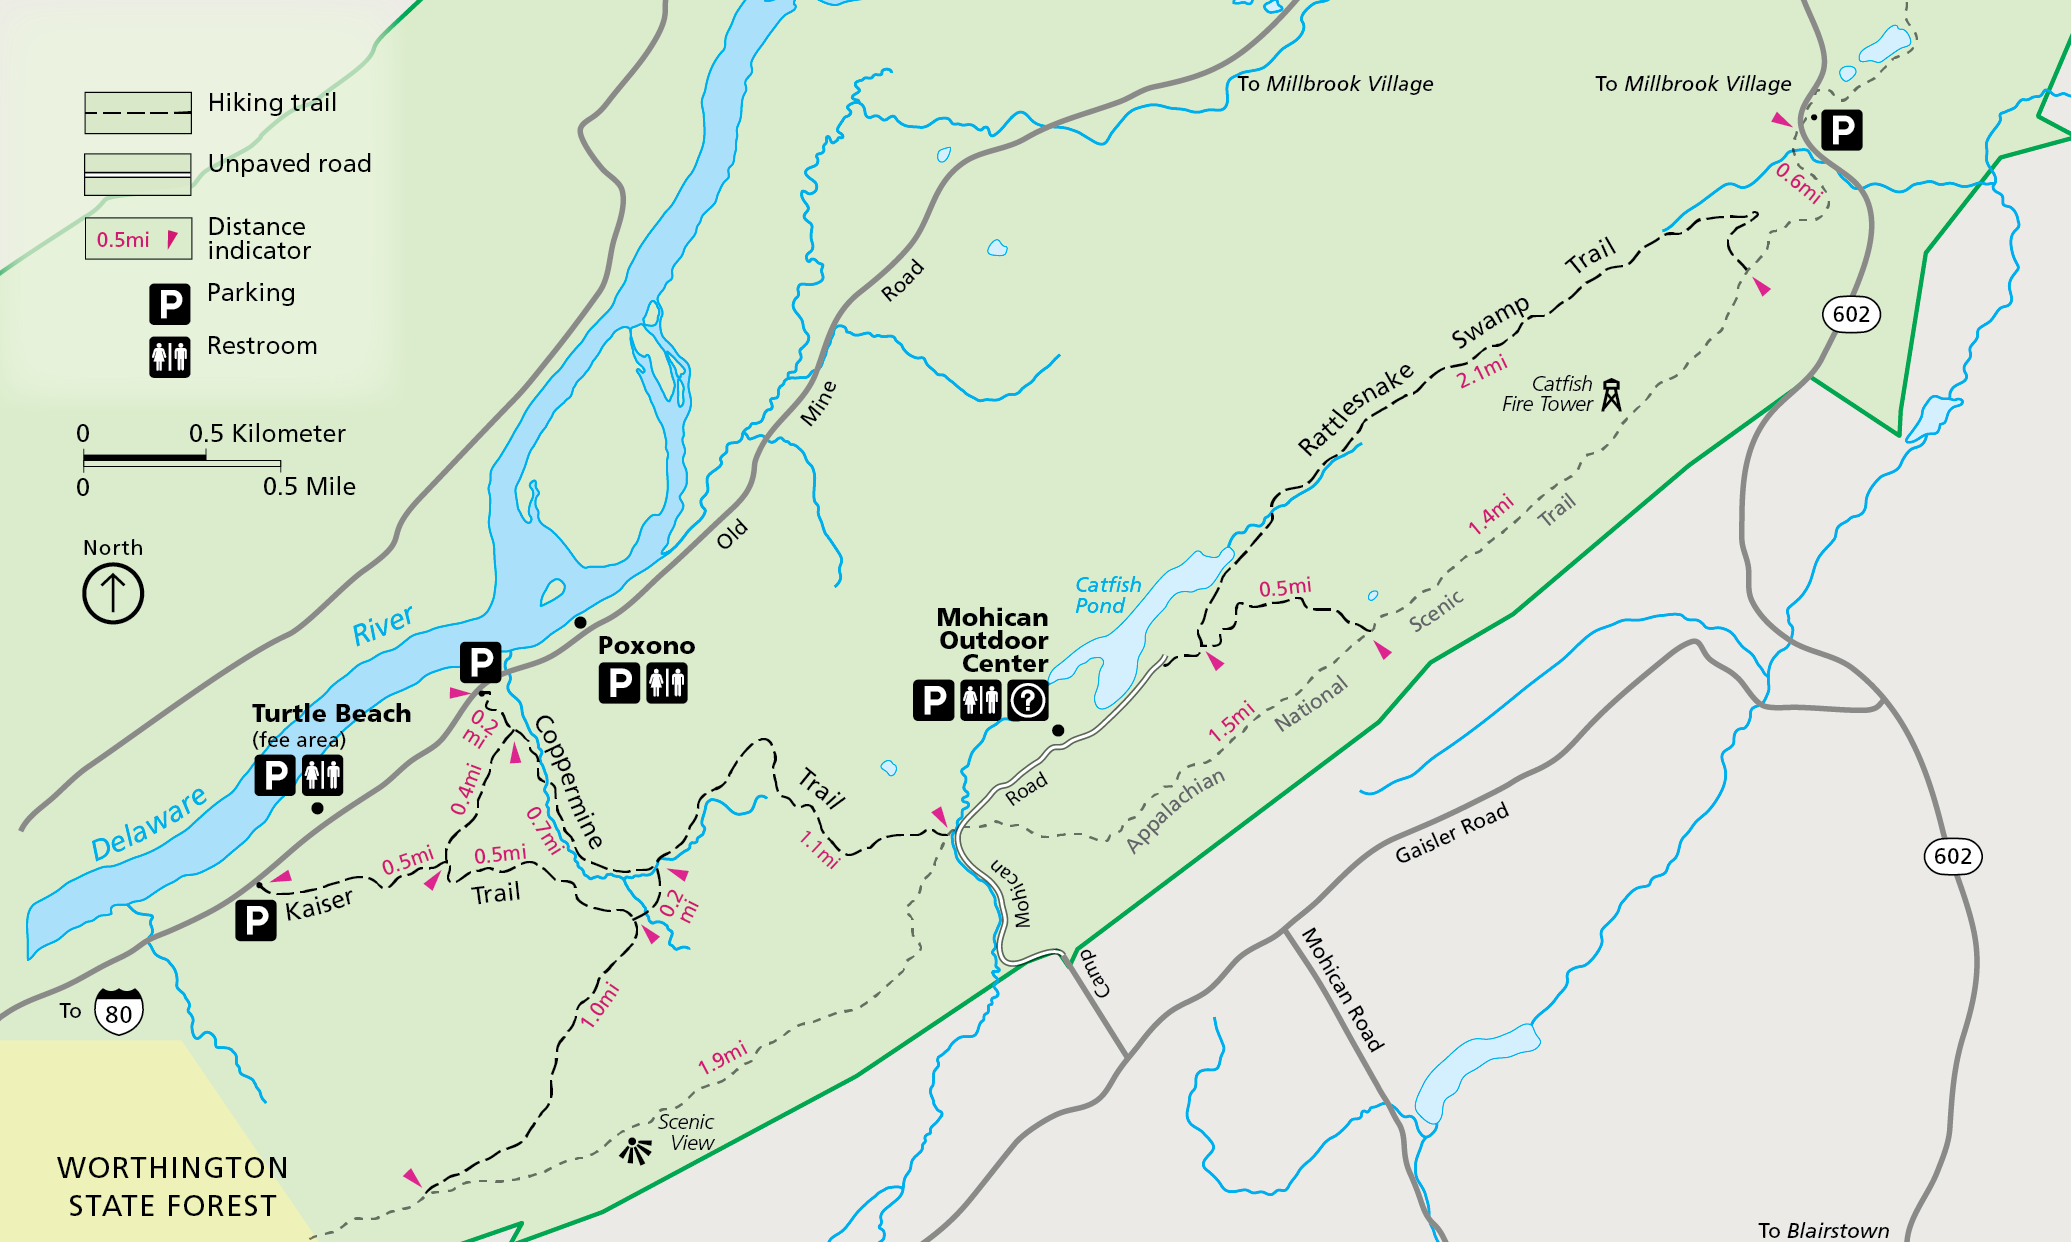 A map of the trails in the Mohican Outdoor Center Area